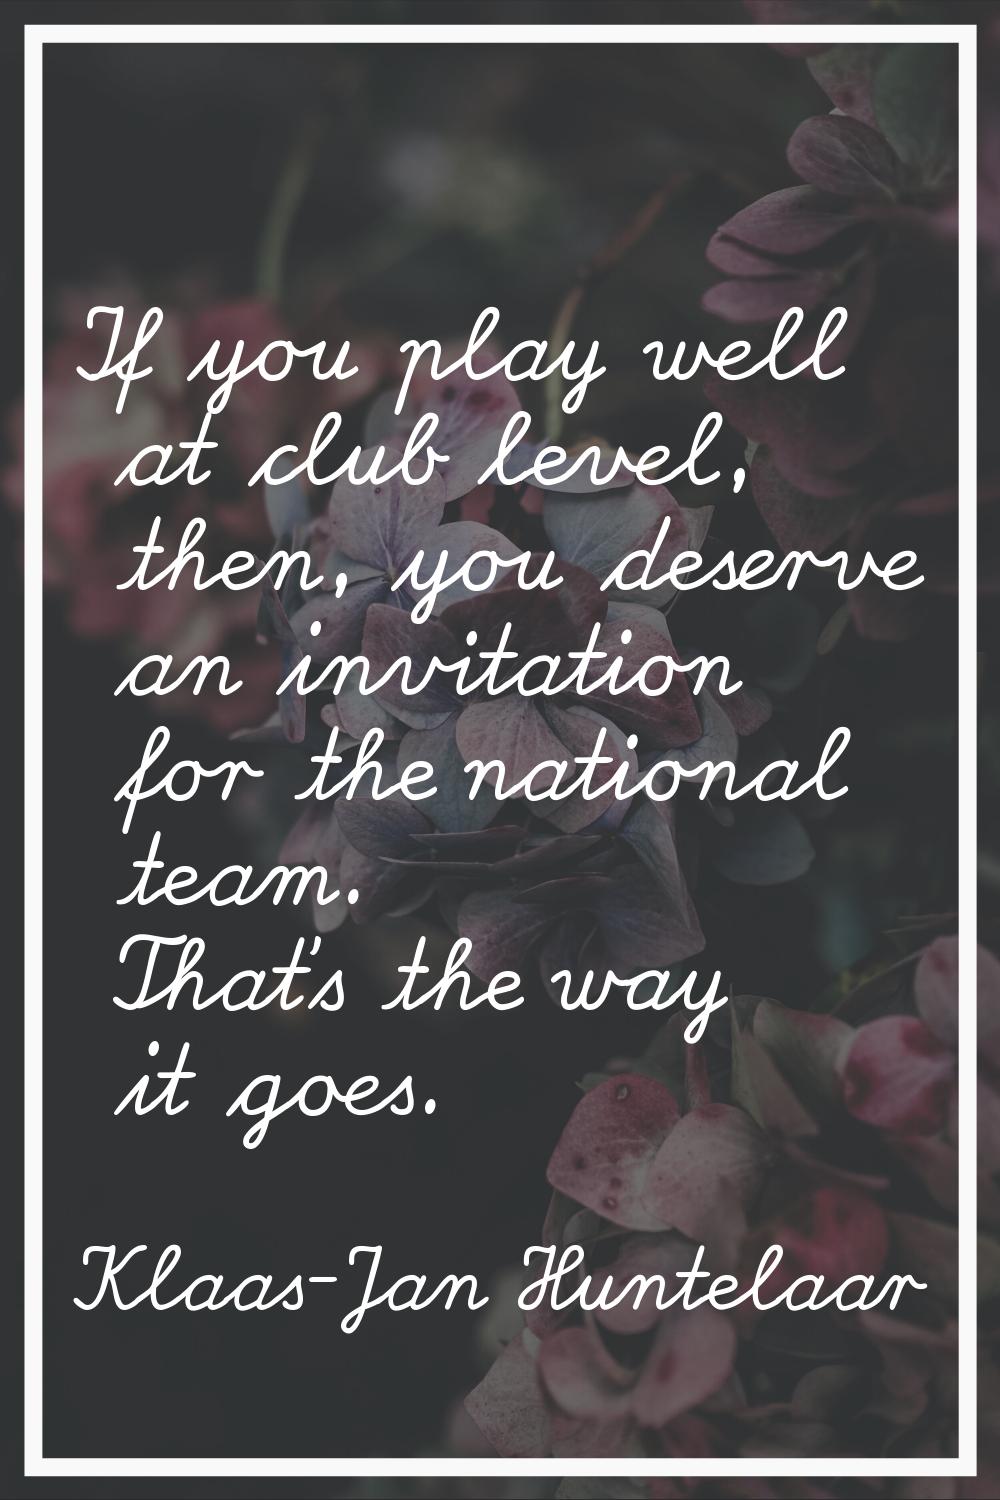 If you play well at club level, then, you deserve an invitation for the national team. That's the w